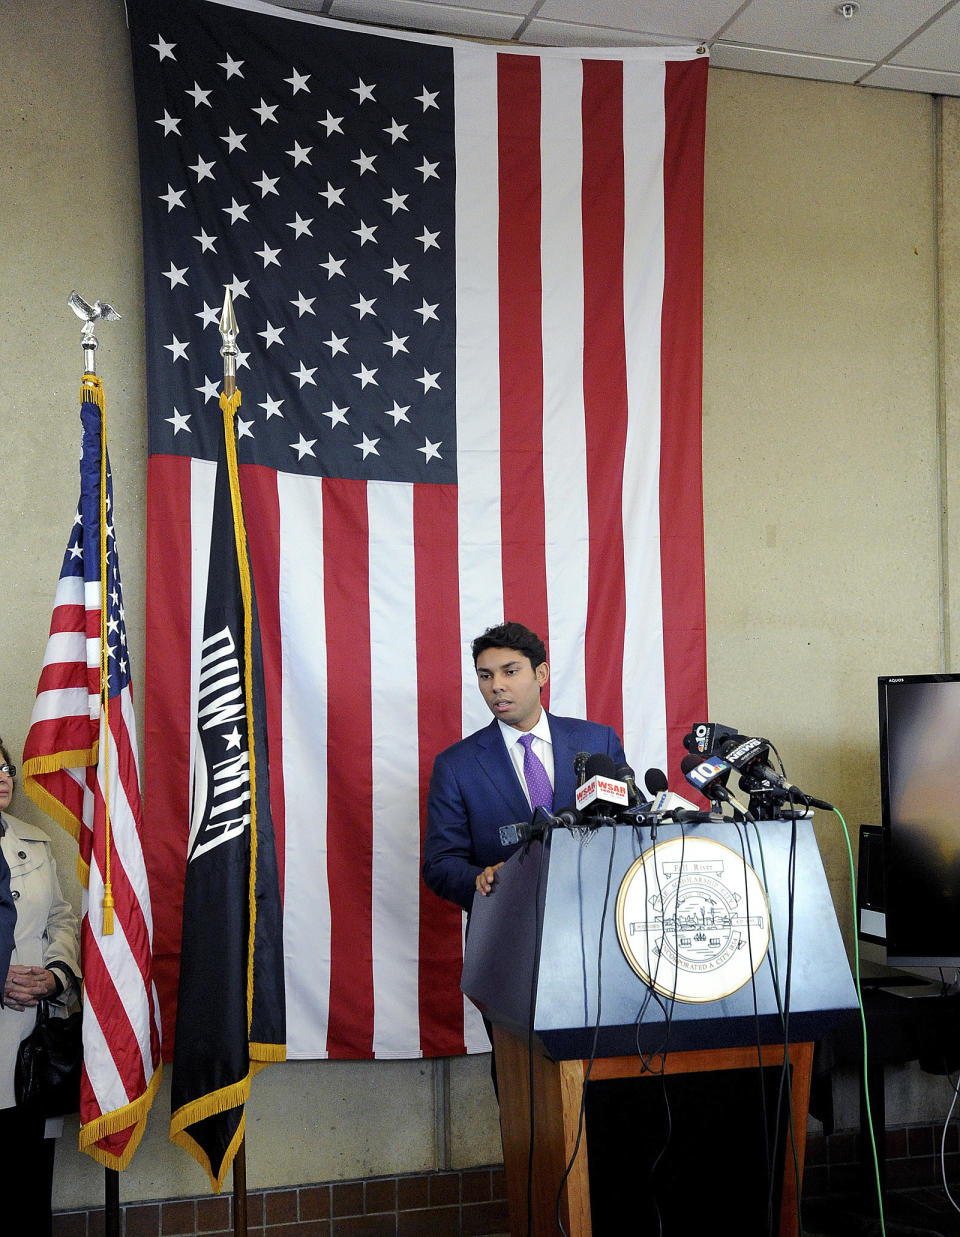 Mayor Jasiel Correia tells his side of the story about his indictment during a press conference Tuesday, Oct. 16, 2018, held at the Fall River Government Center in Fall River, Mass. (Dave Souza/The Herald News of Fall River via AP)